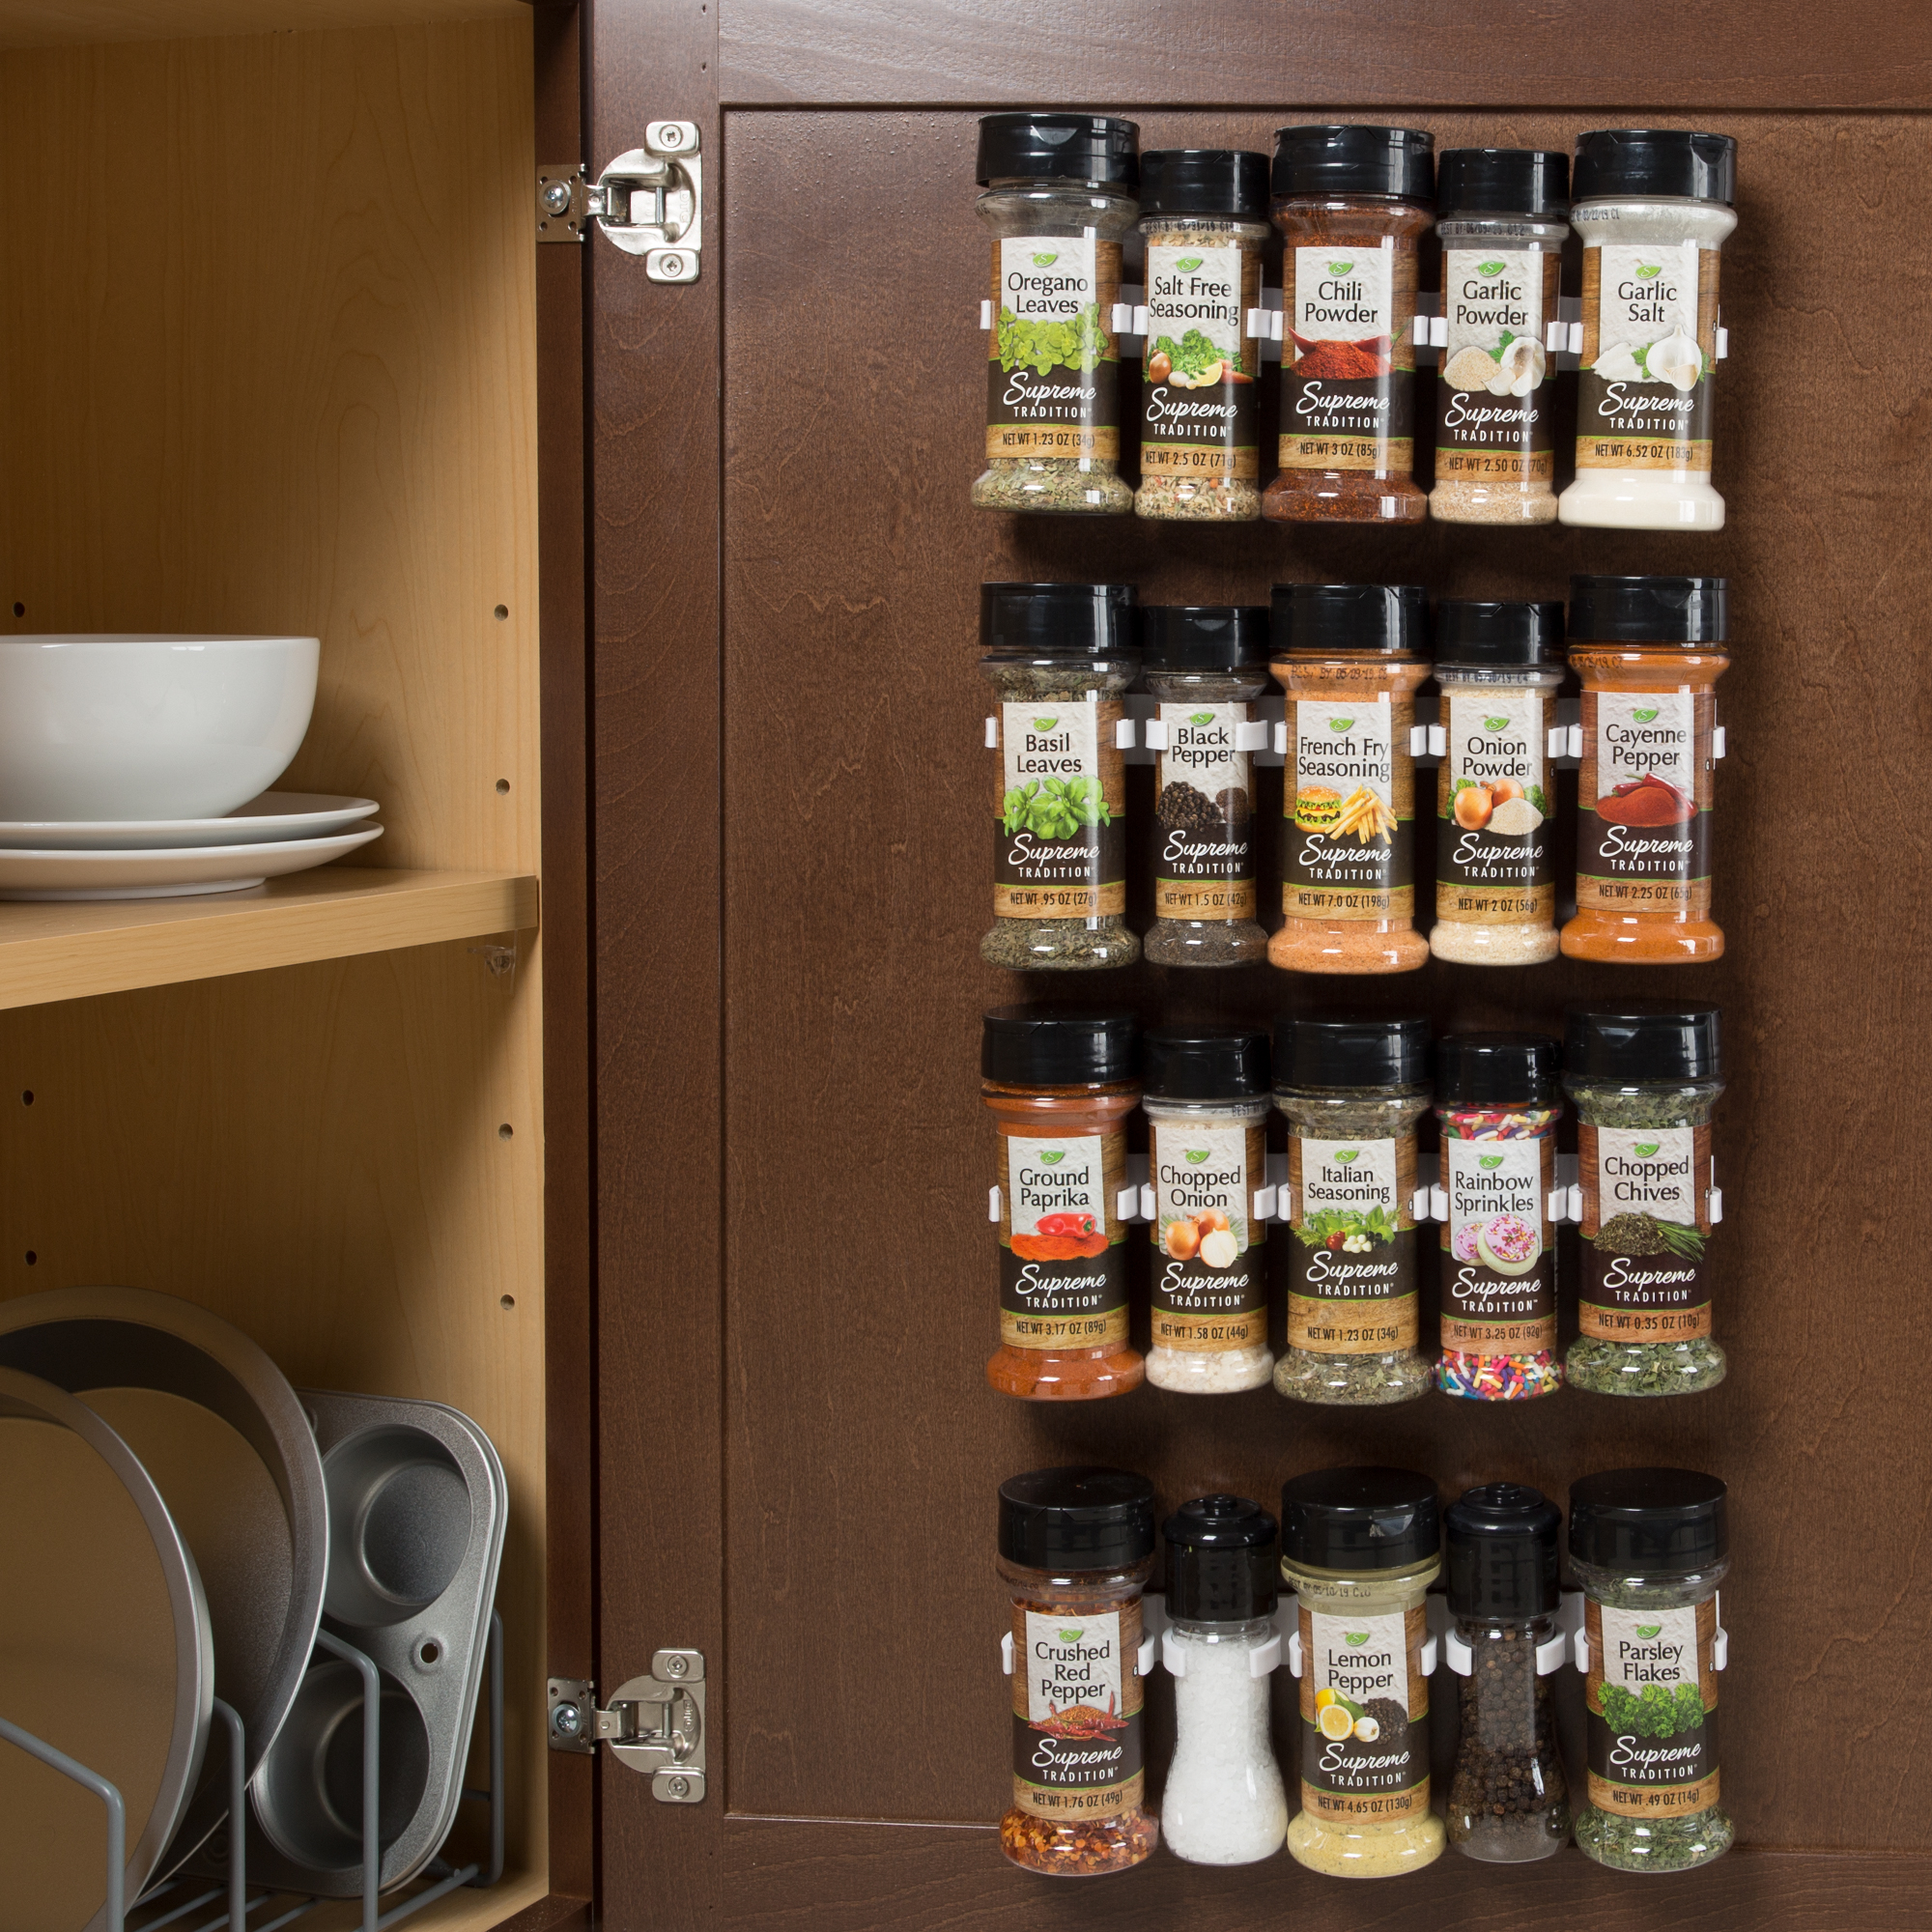 Spice Rack Organizer Easy Stick to Cupboard Door Holds up to 20 Spices